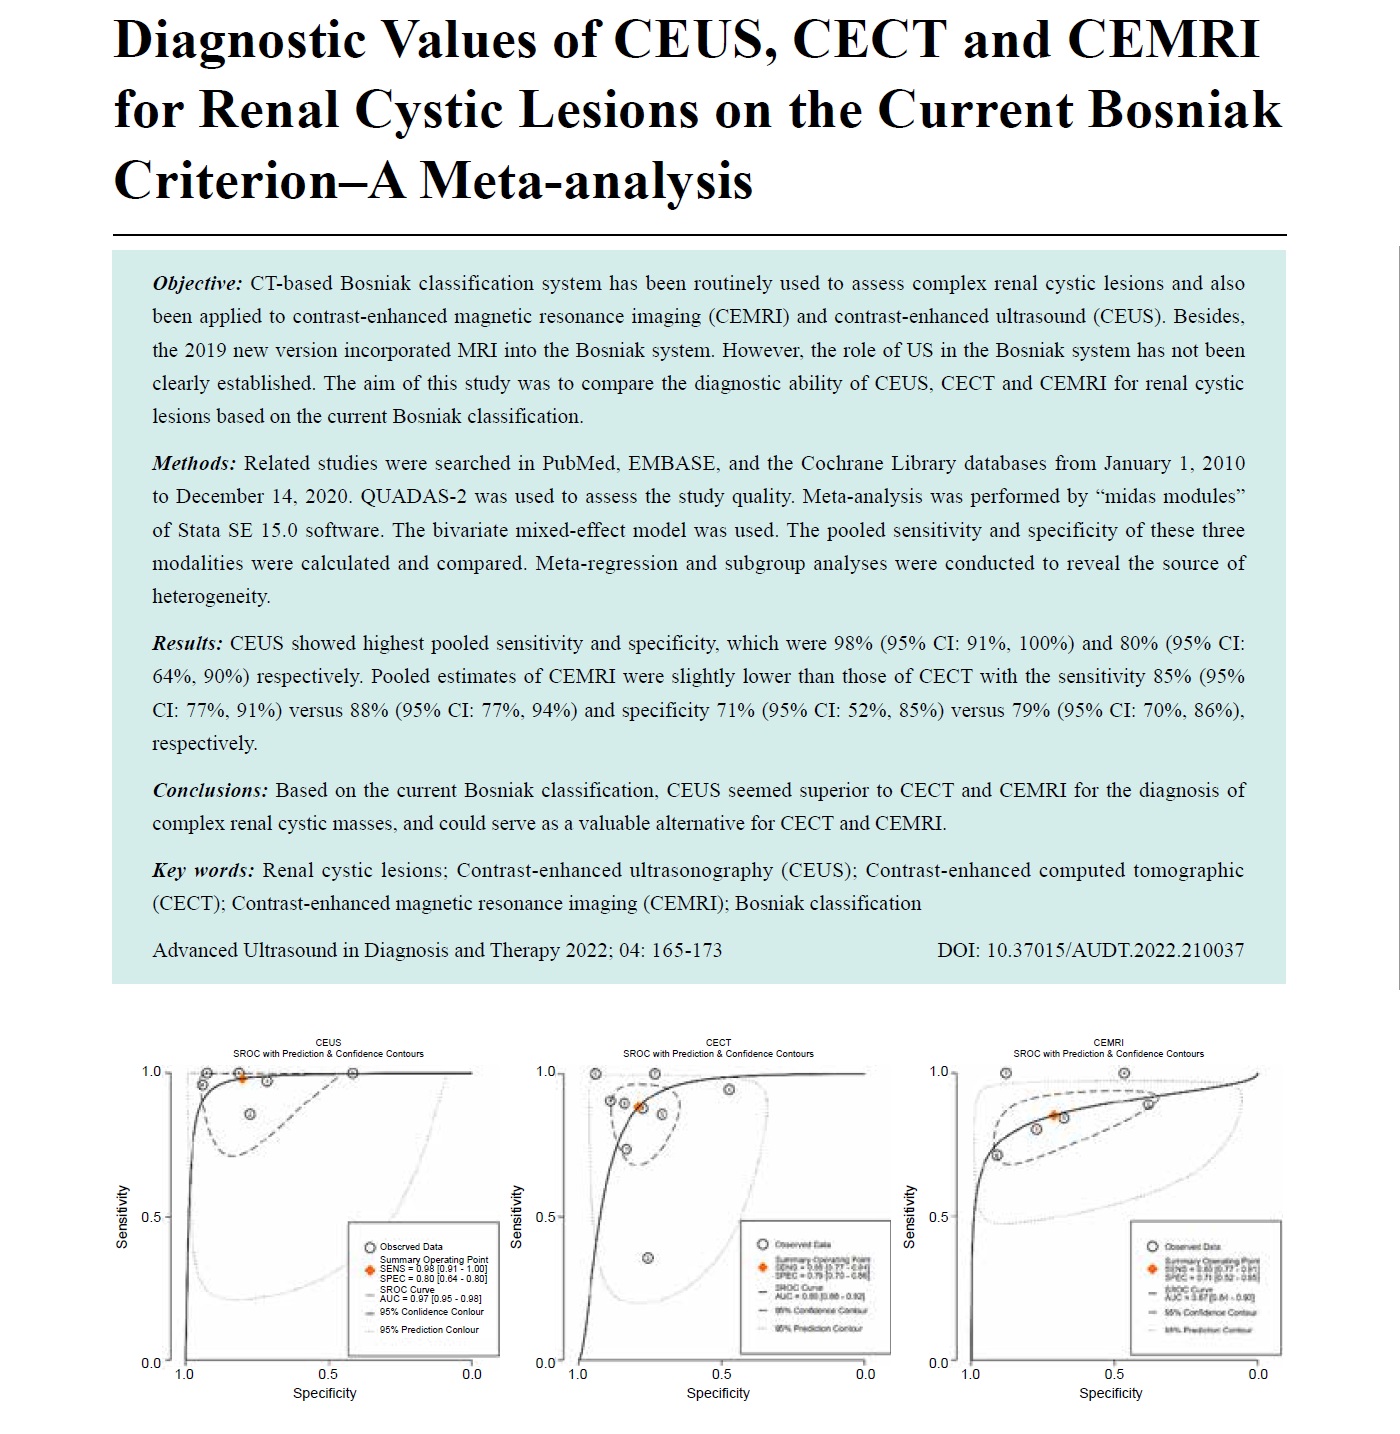 Diagnostic Values of CEUS, CECT and CEMRI for Renal Cystic Lesions on the Current Bosniak Criterion-A Meta-analysis